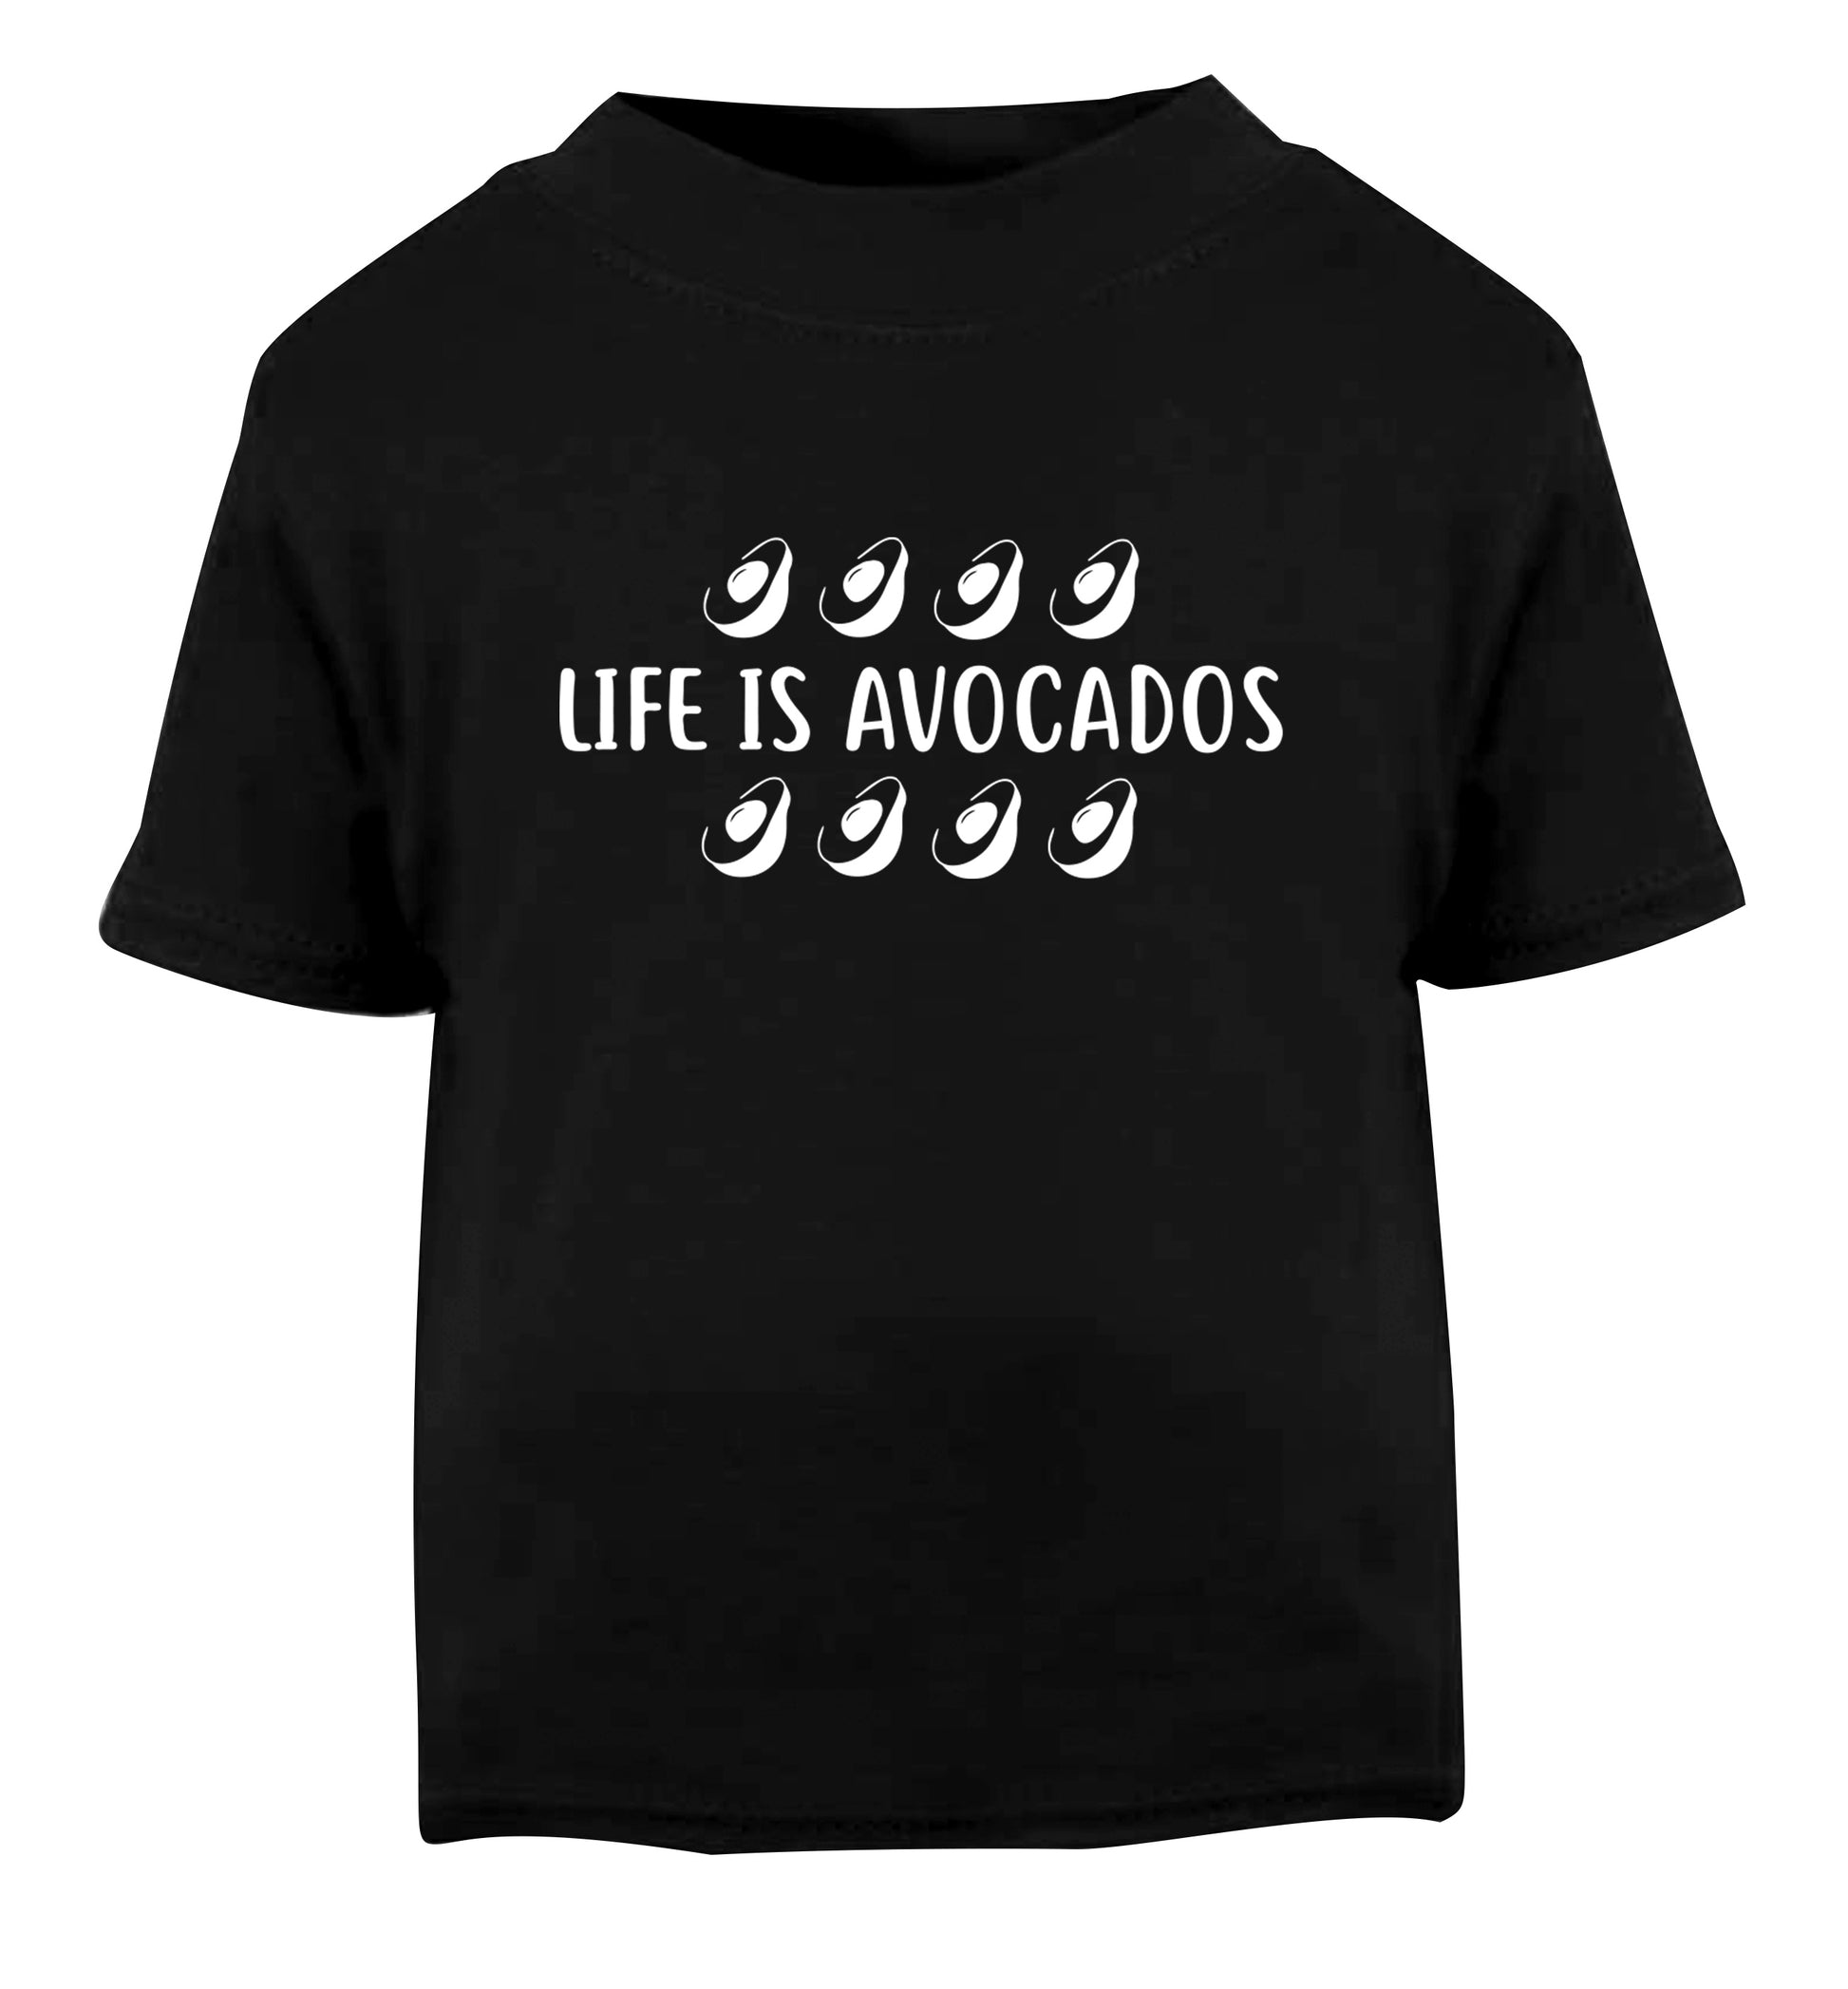 Life is avocados Black Baby Toddler Tshirt 2 years